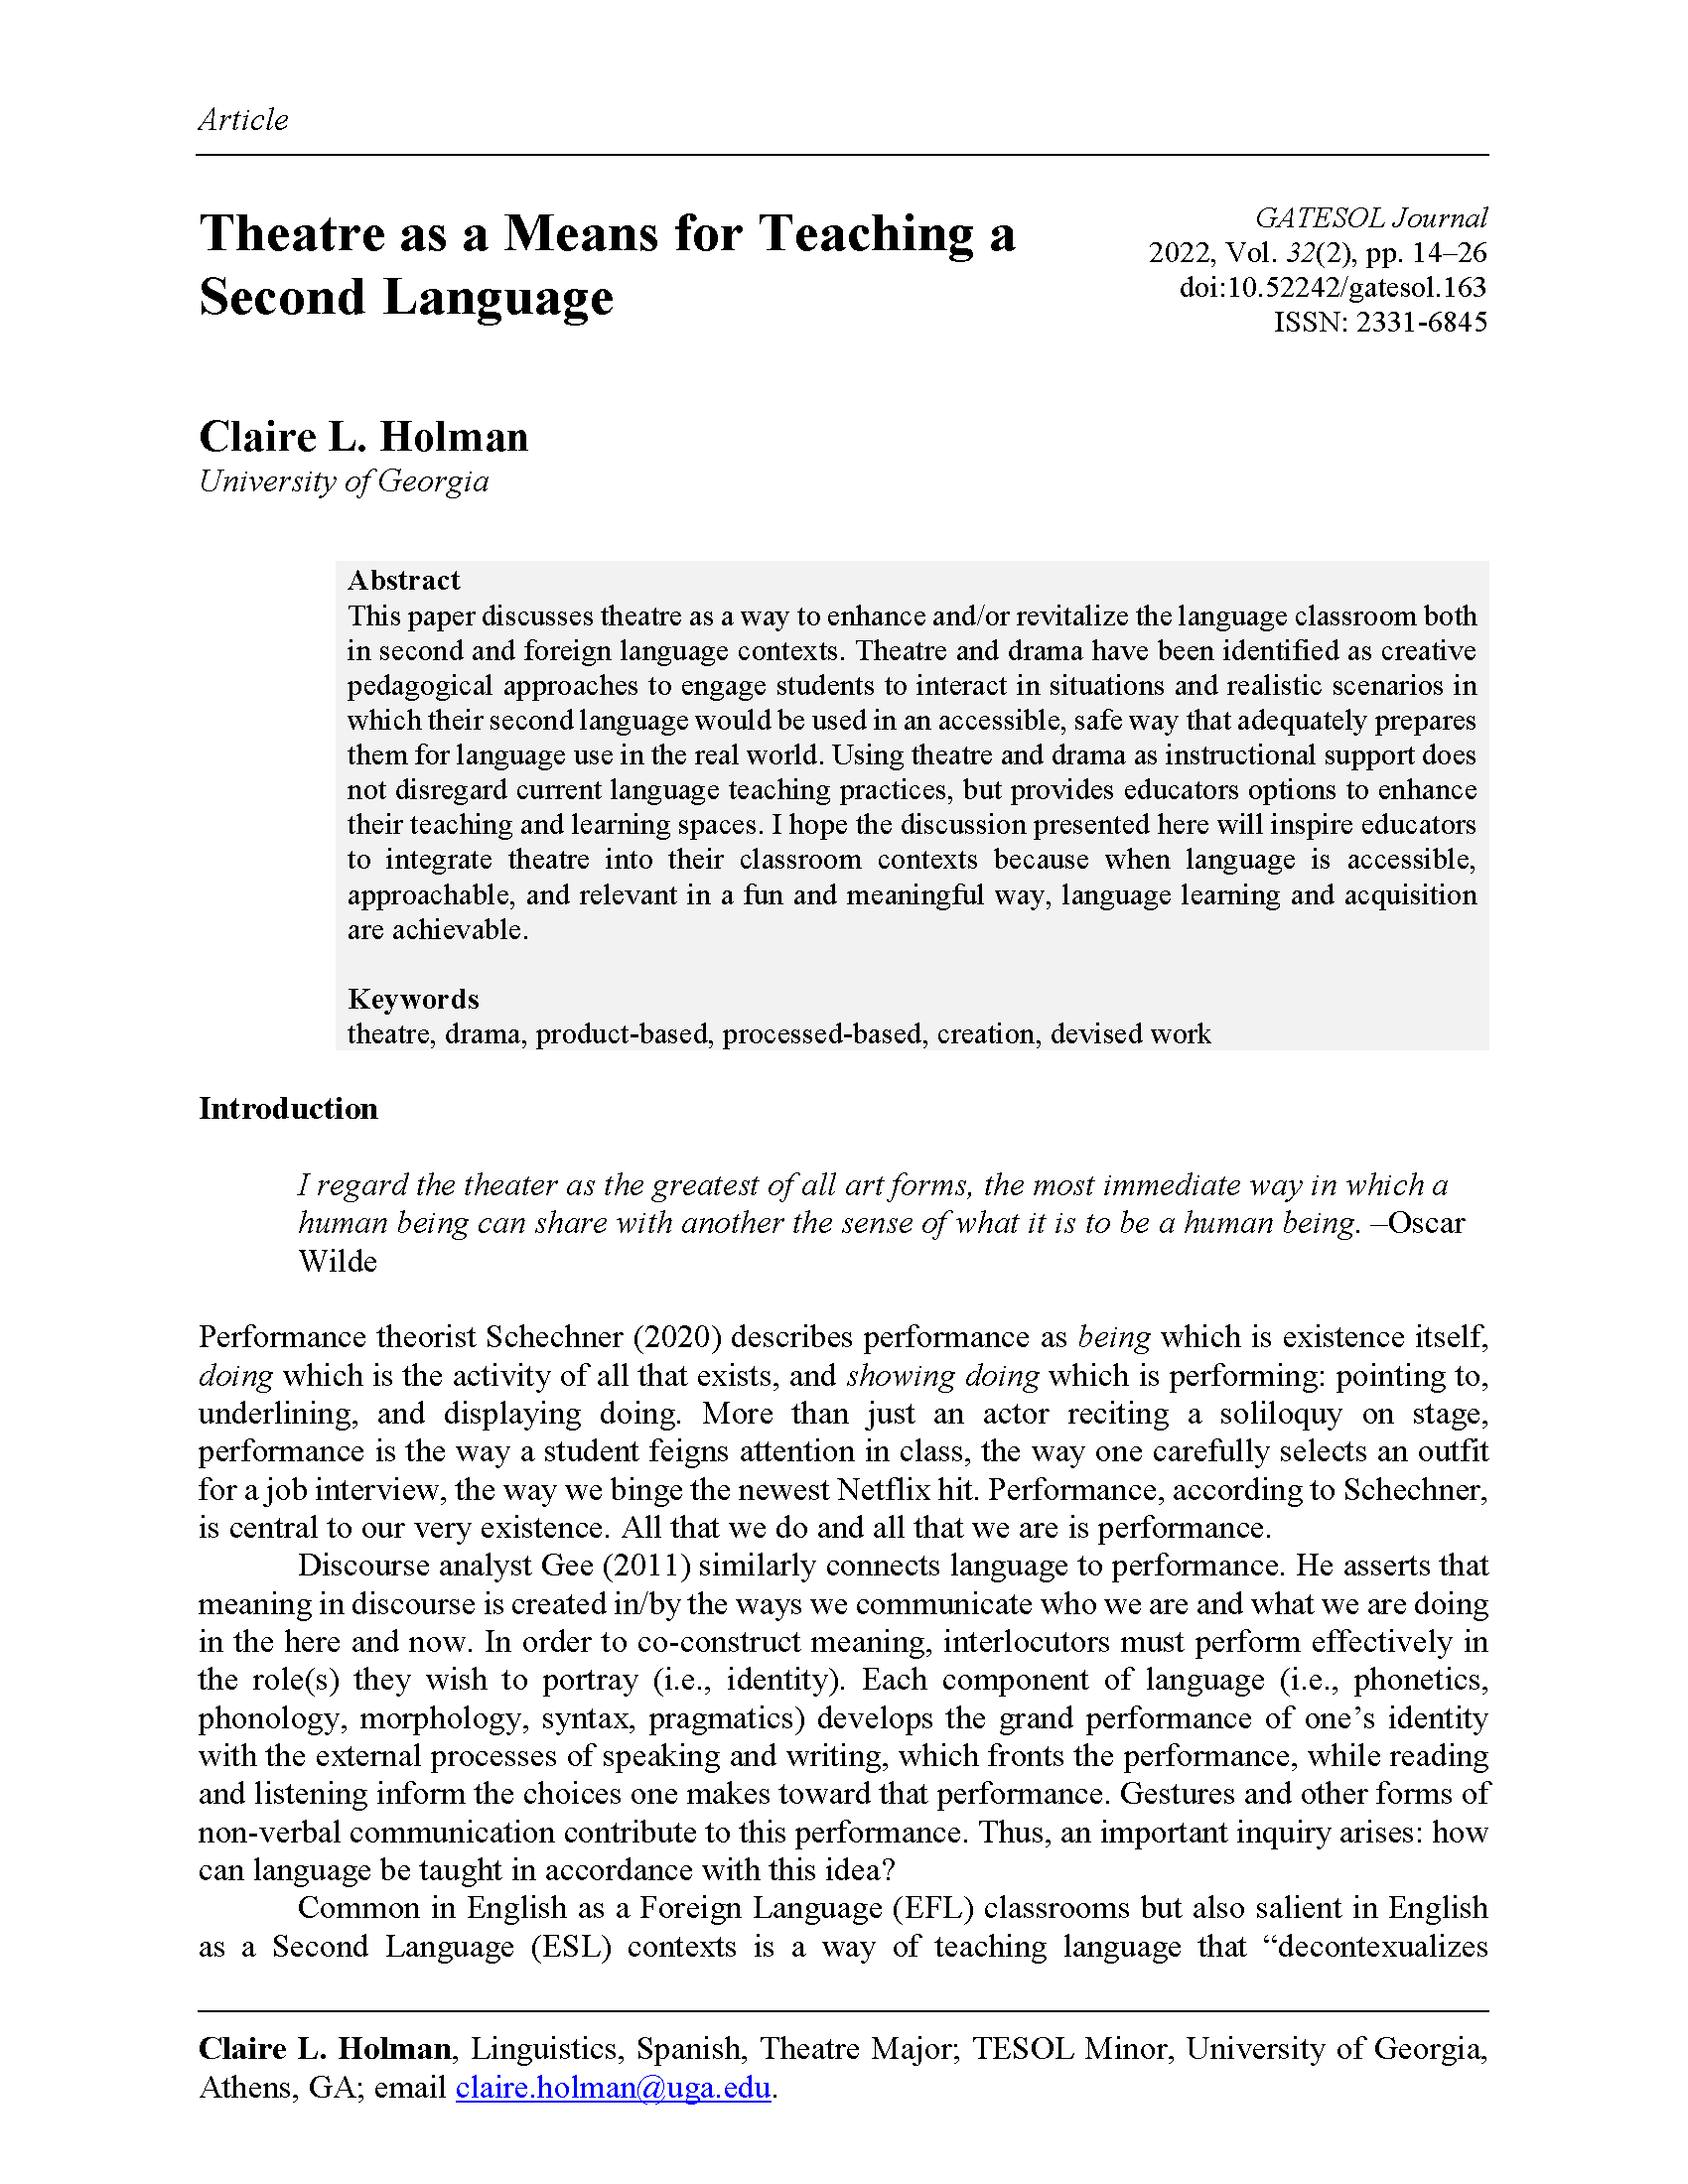 Theatre as a Means for Teaching a Second Language (Holman, 2022)